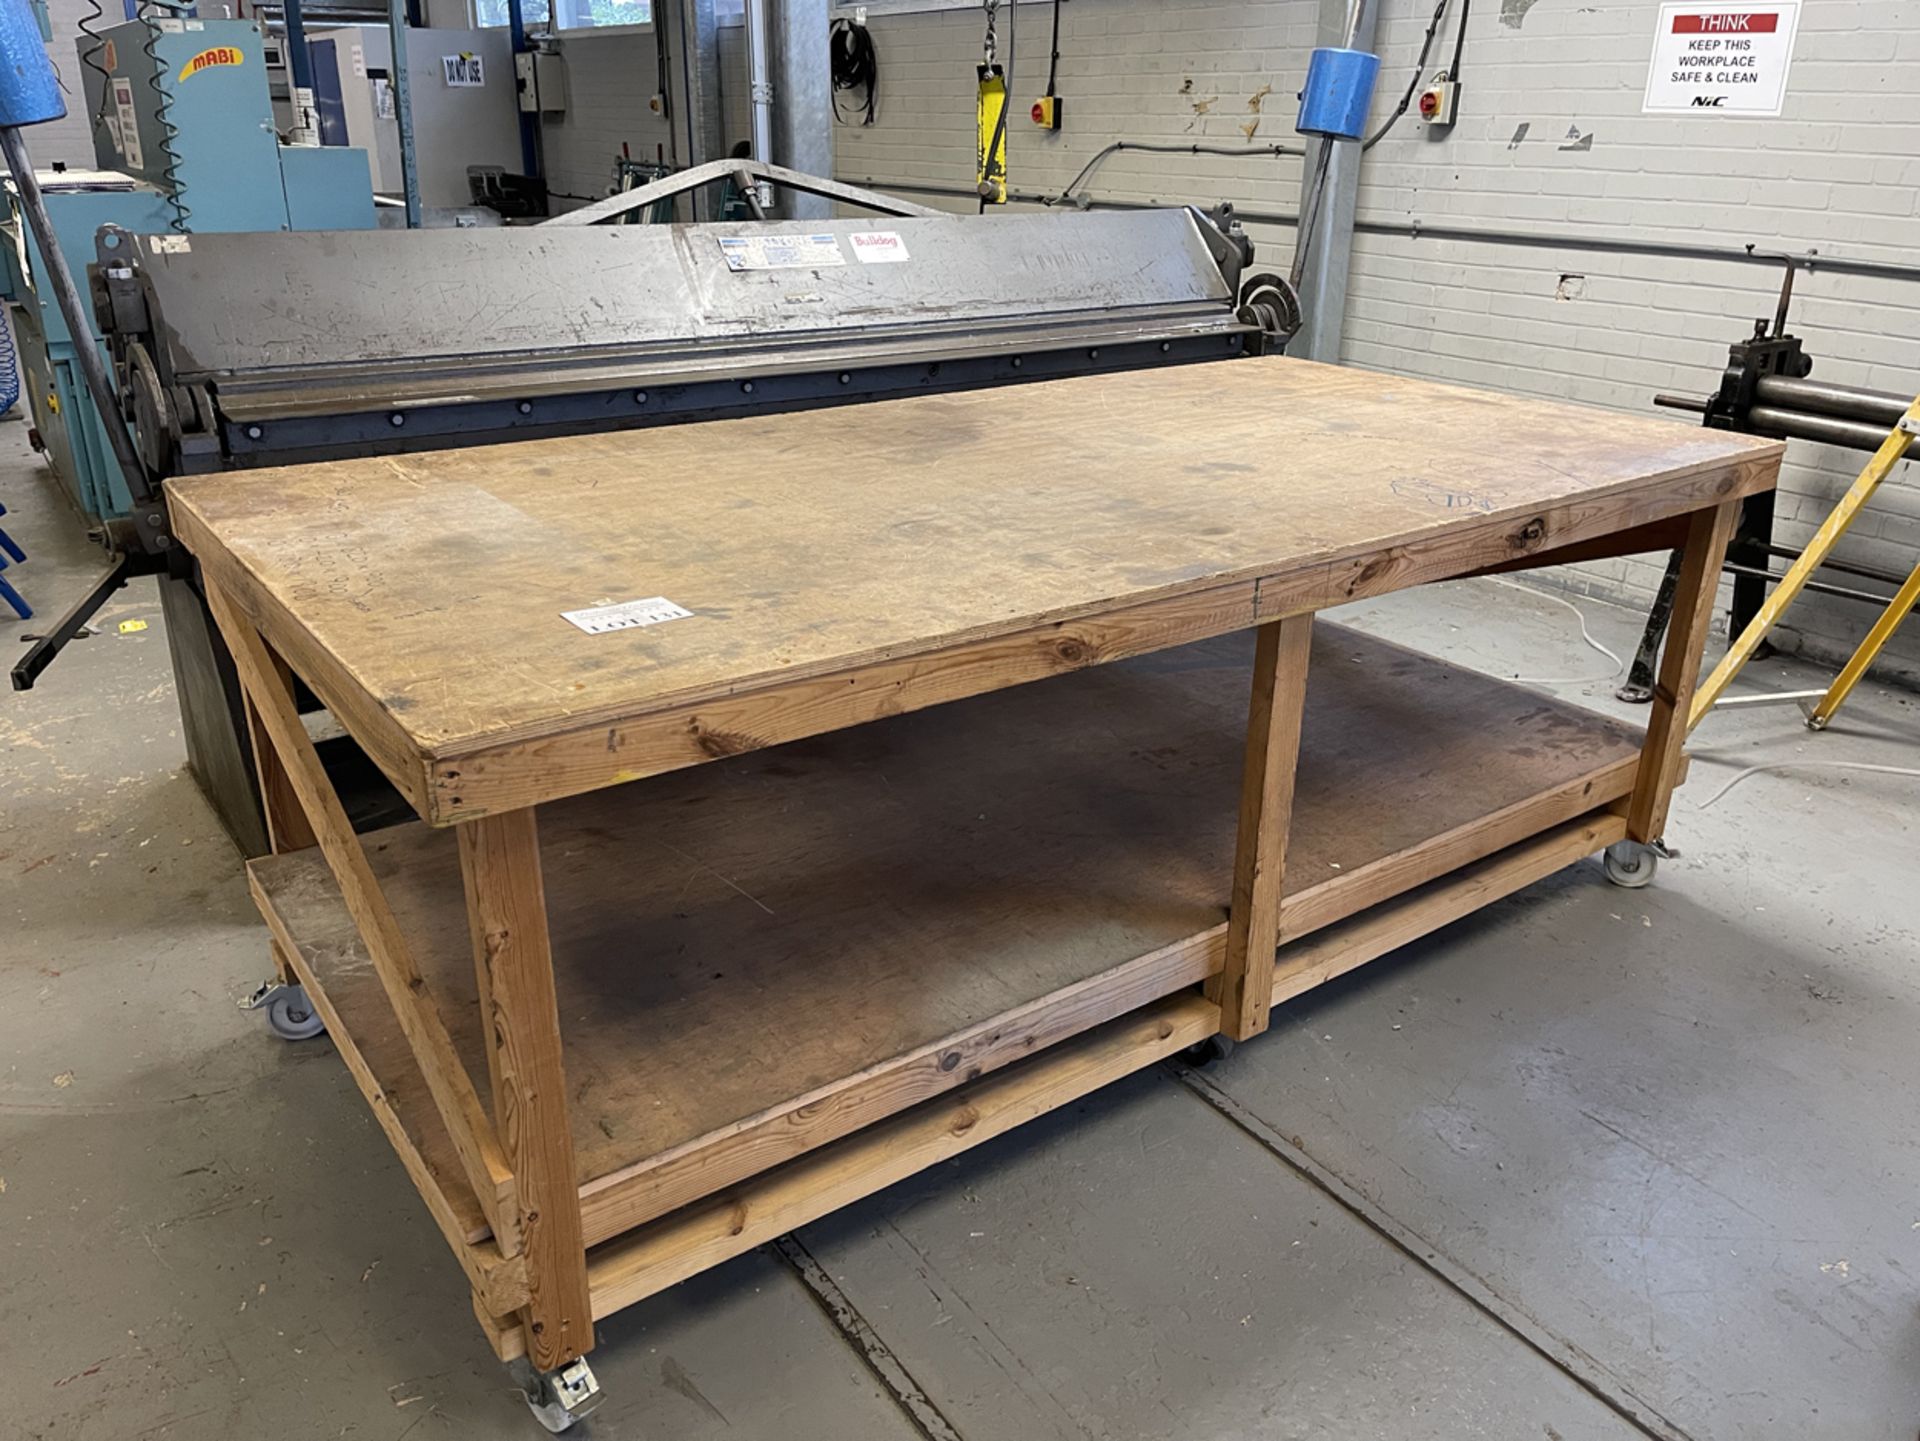 Mobile Wooden Work Bench. 4' x 8' x 37" High.